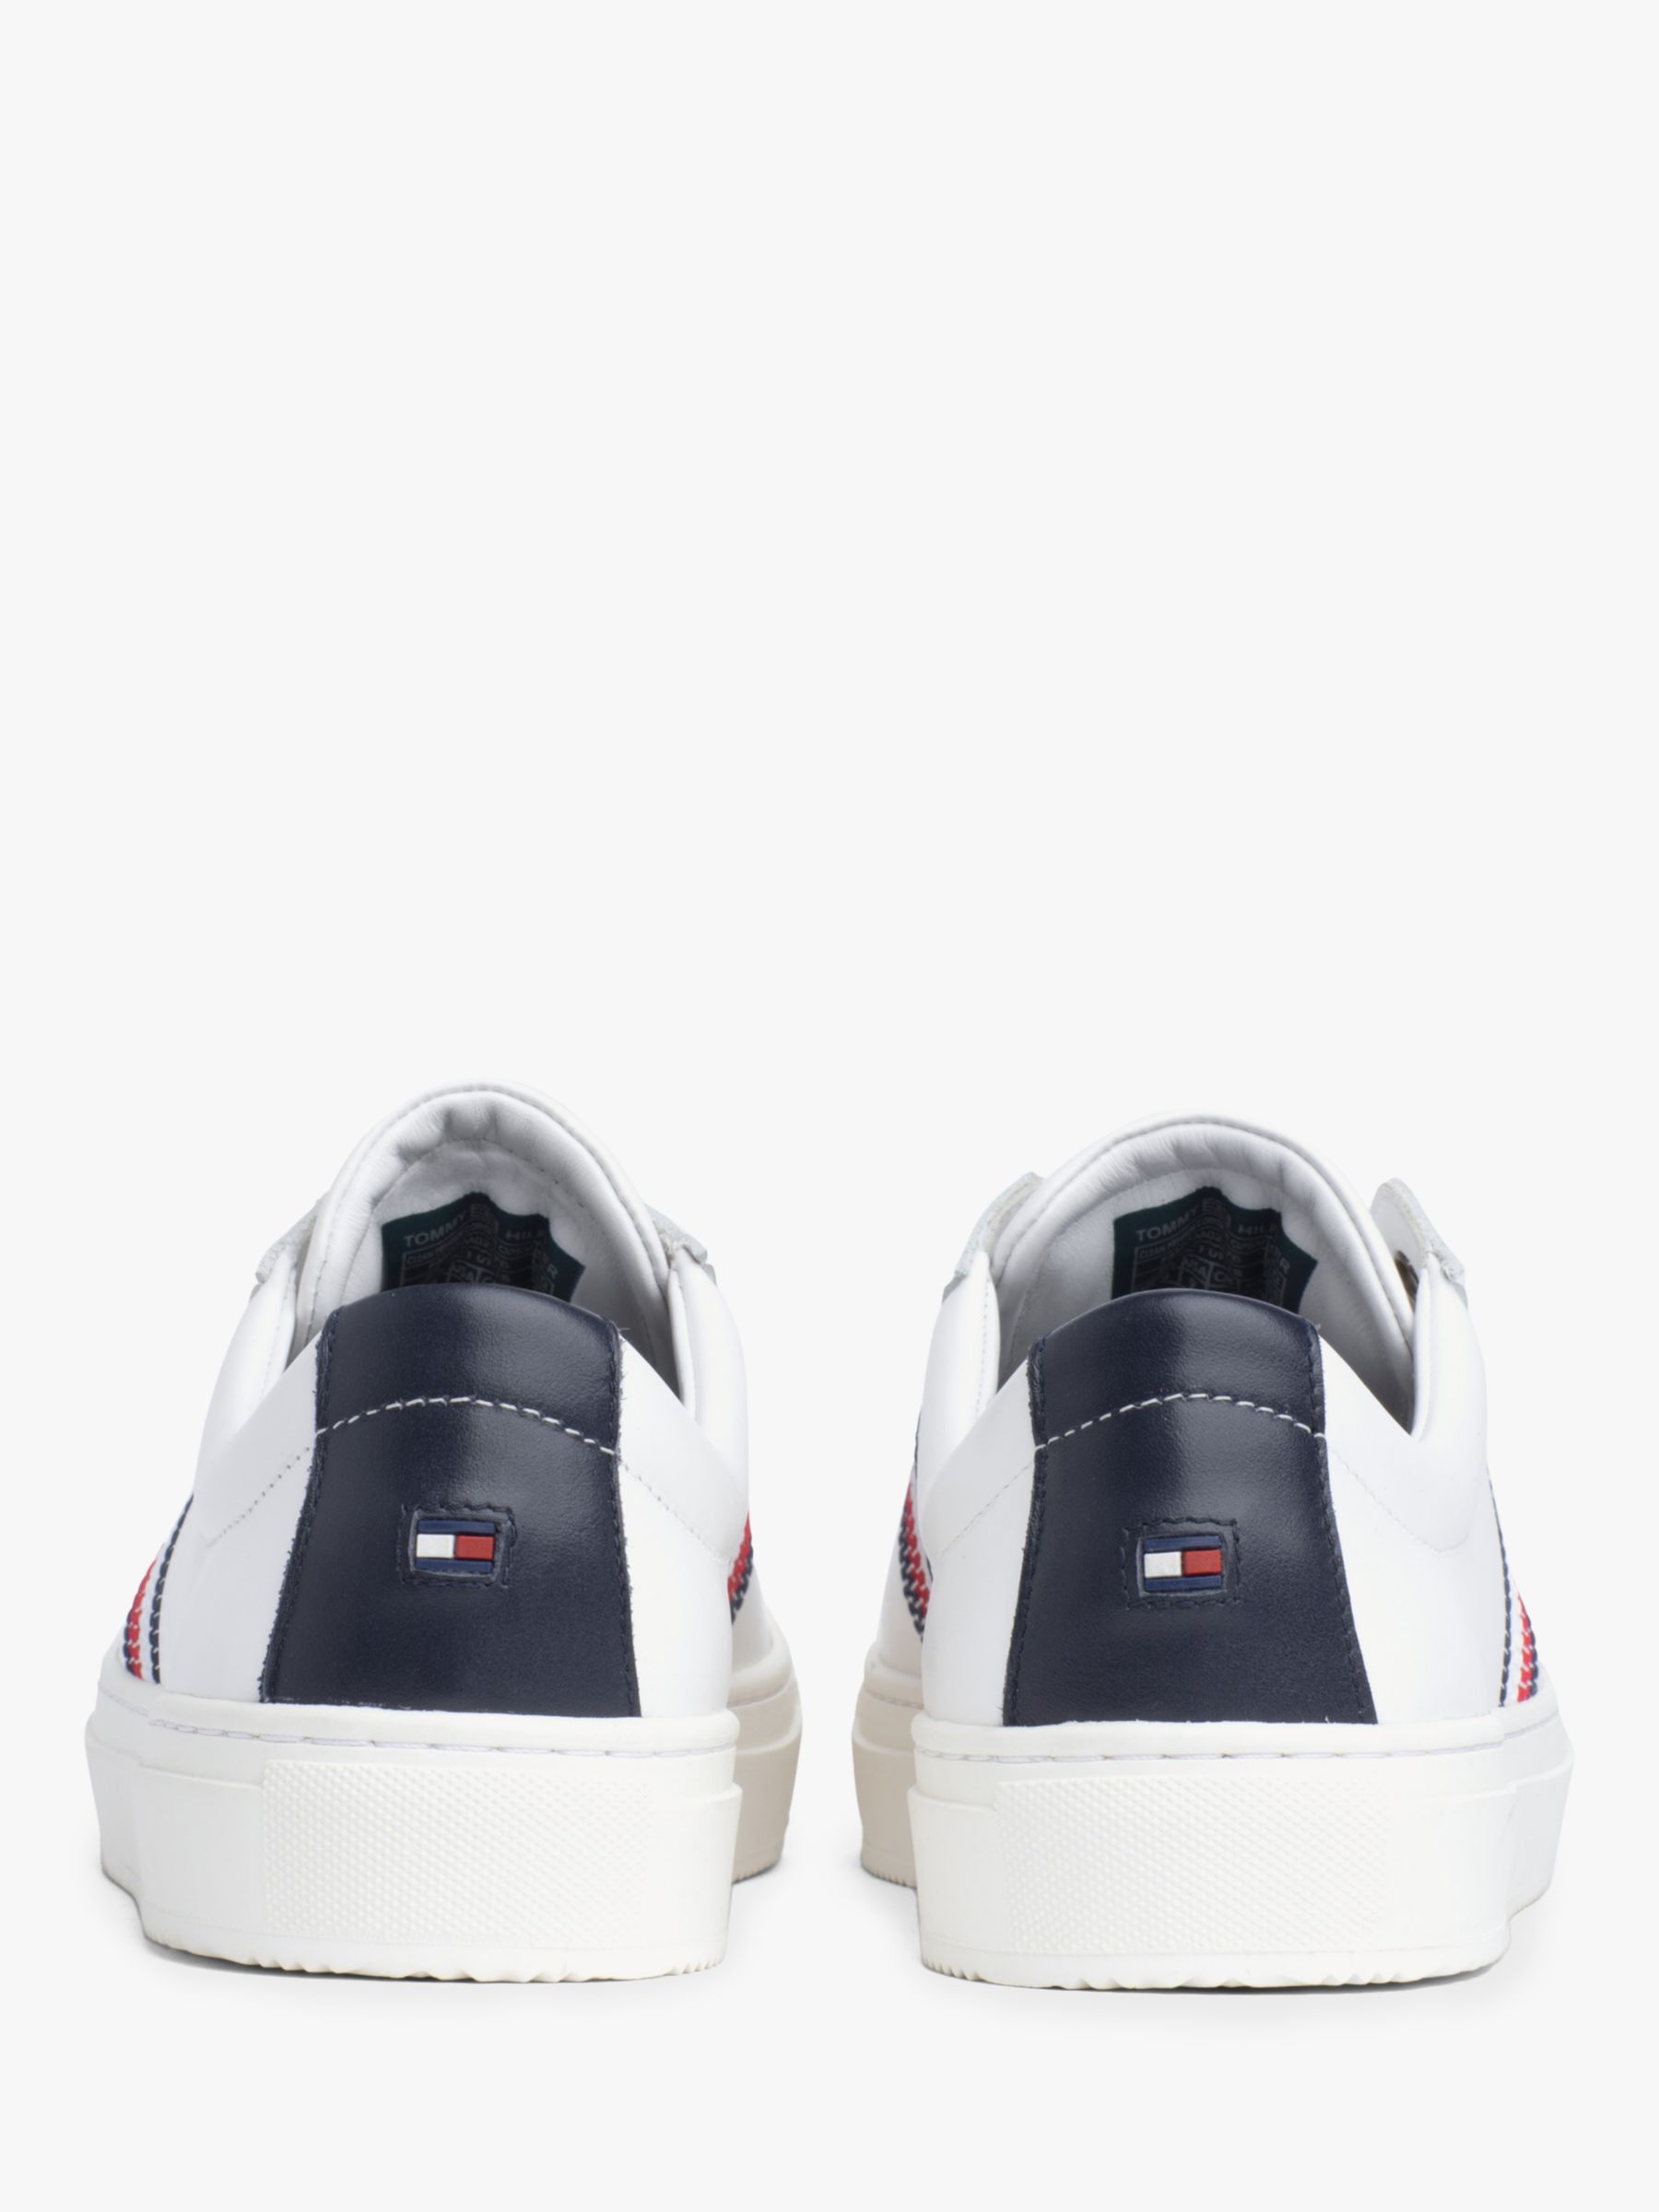 Tommy Hilfiger Clean Premium Corporate Cupsole Leather Trainers, White